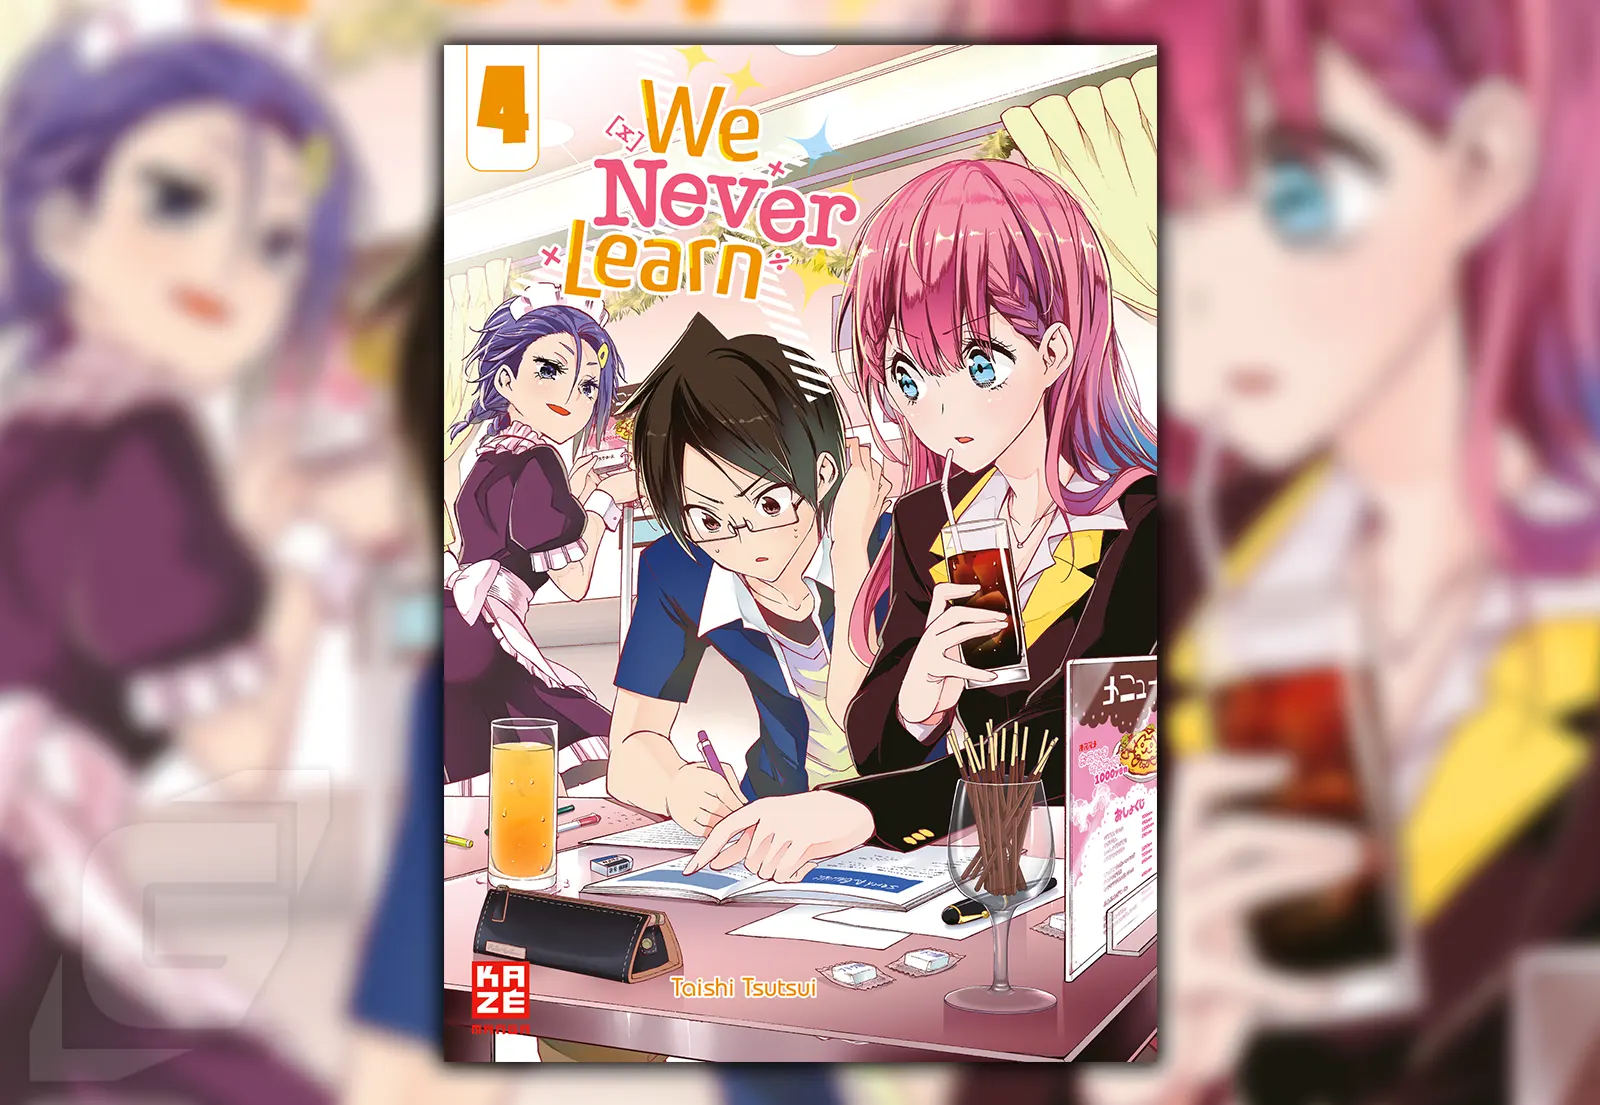 Review zu Band 4 von We Never Learn Manga